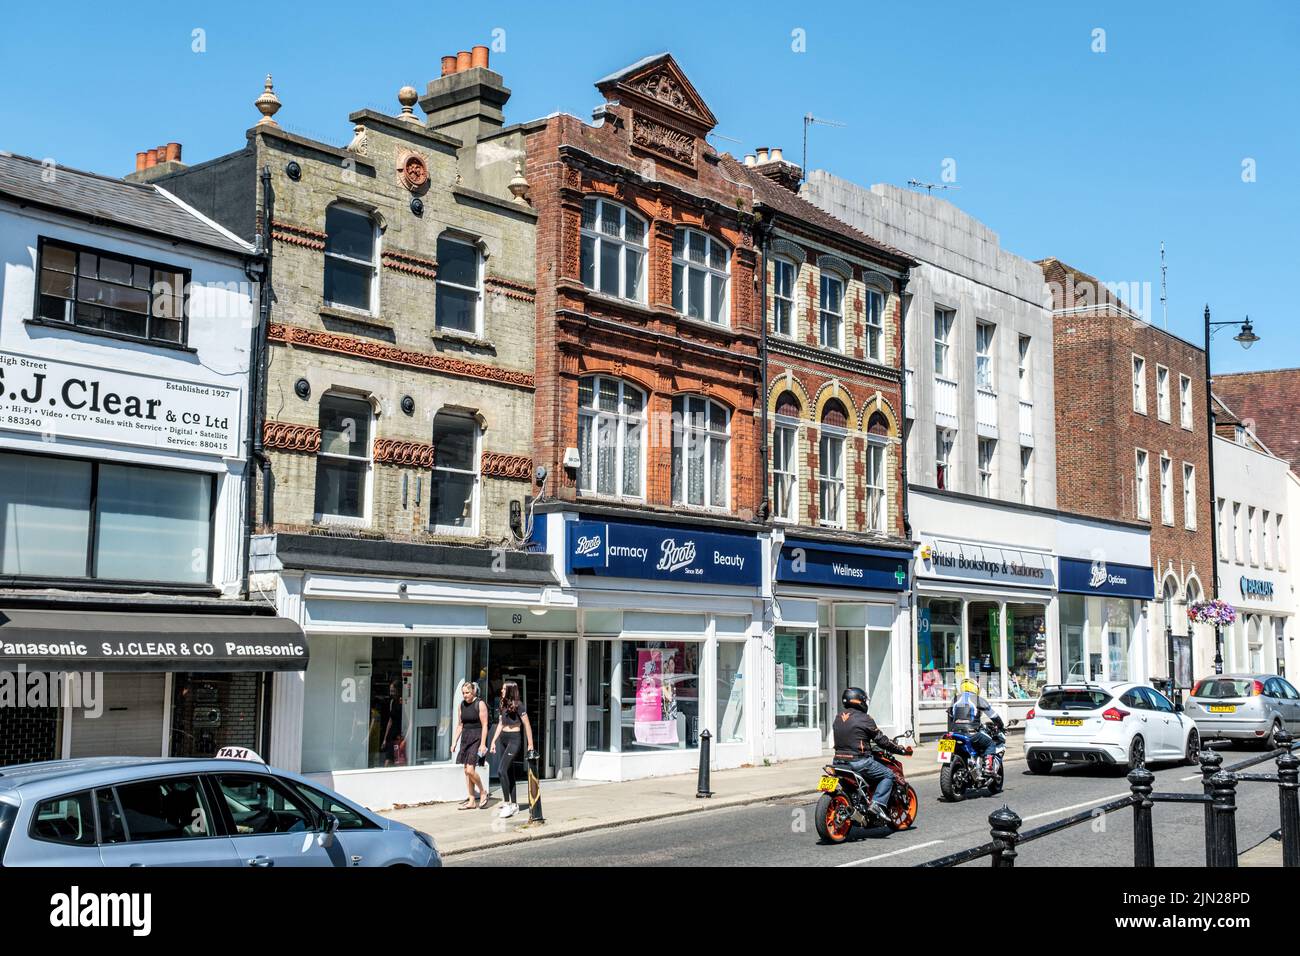 Dorking, Surrey Hills, London UK, July 07 2022, Row of High Street Retail Shops With Traffic Cars And Motorbike On Road Stock Photo